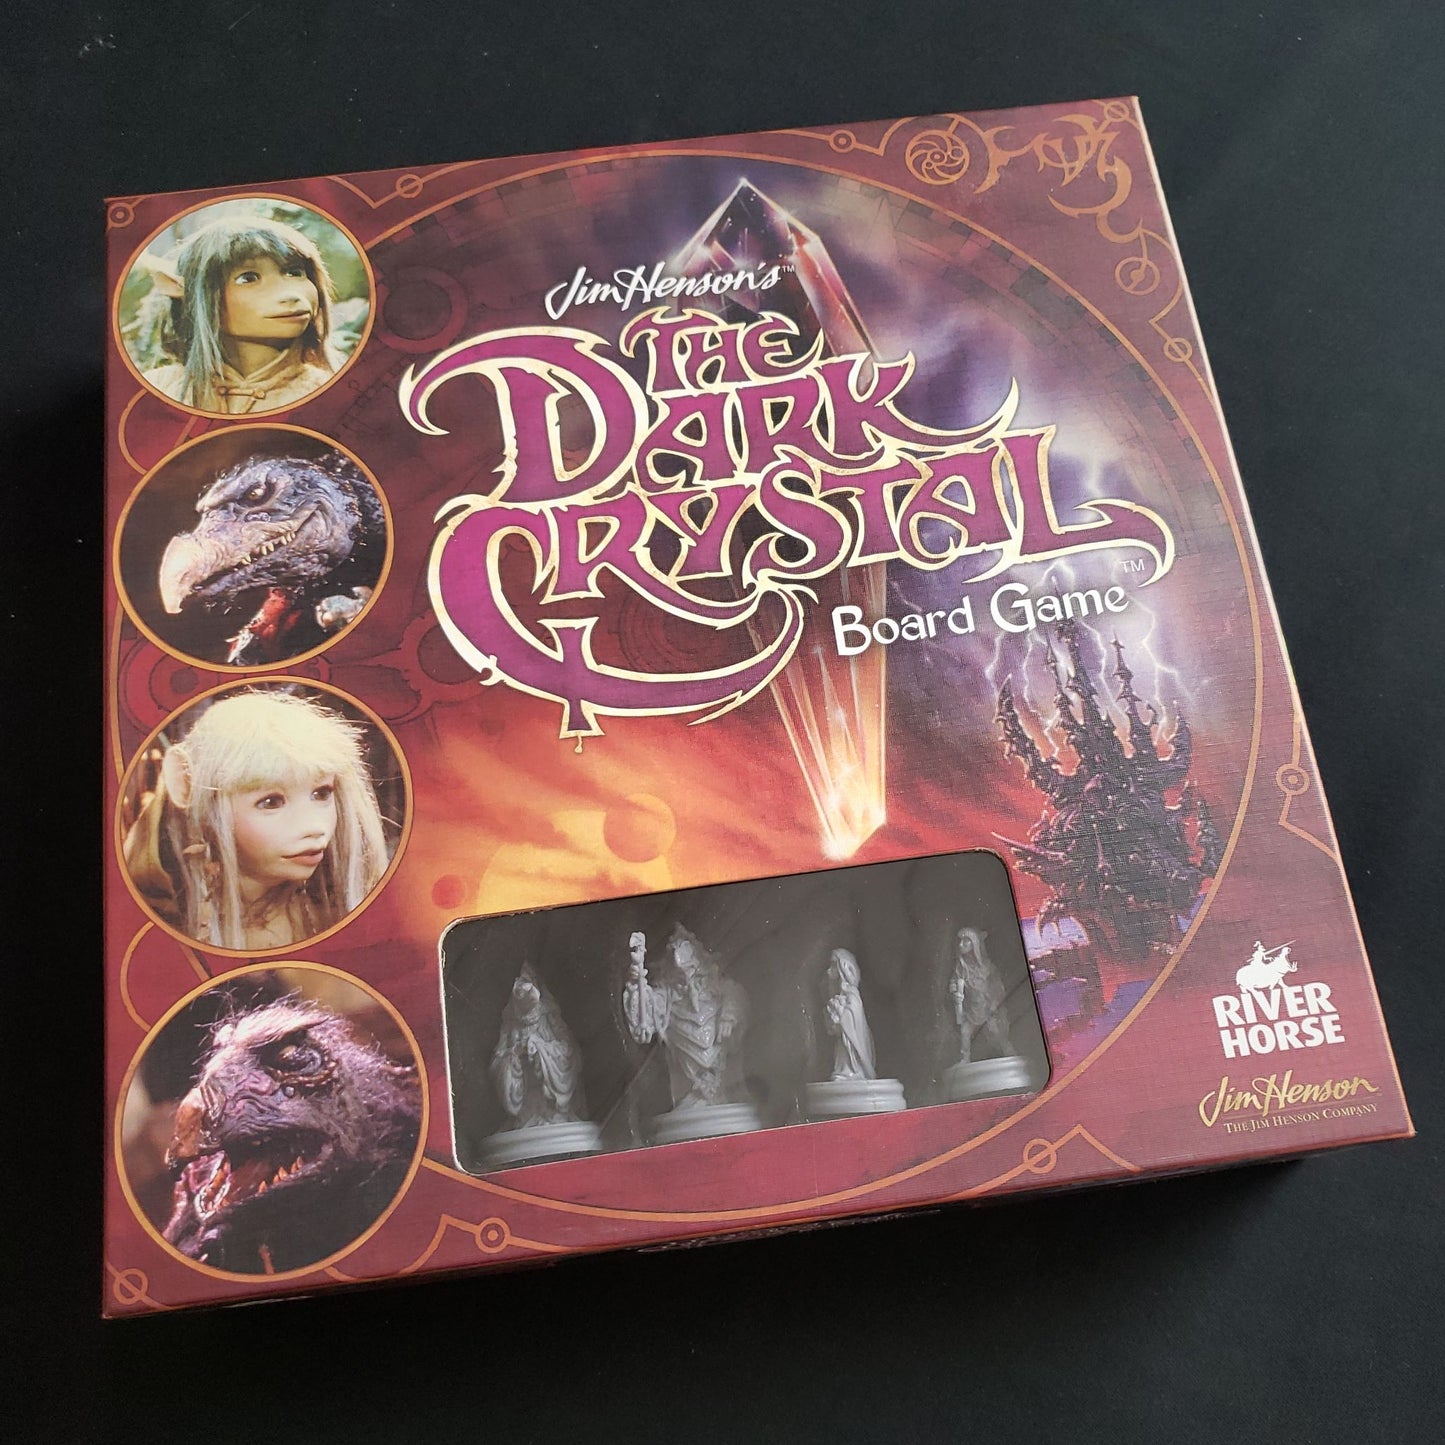 Jim Henson's Dark Crystal board game - front cover of box